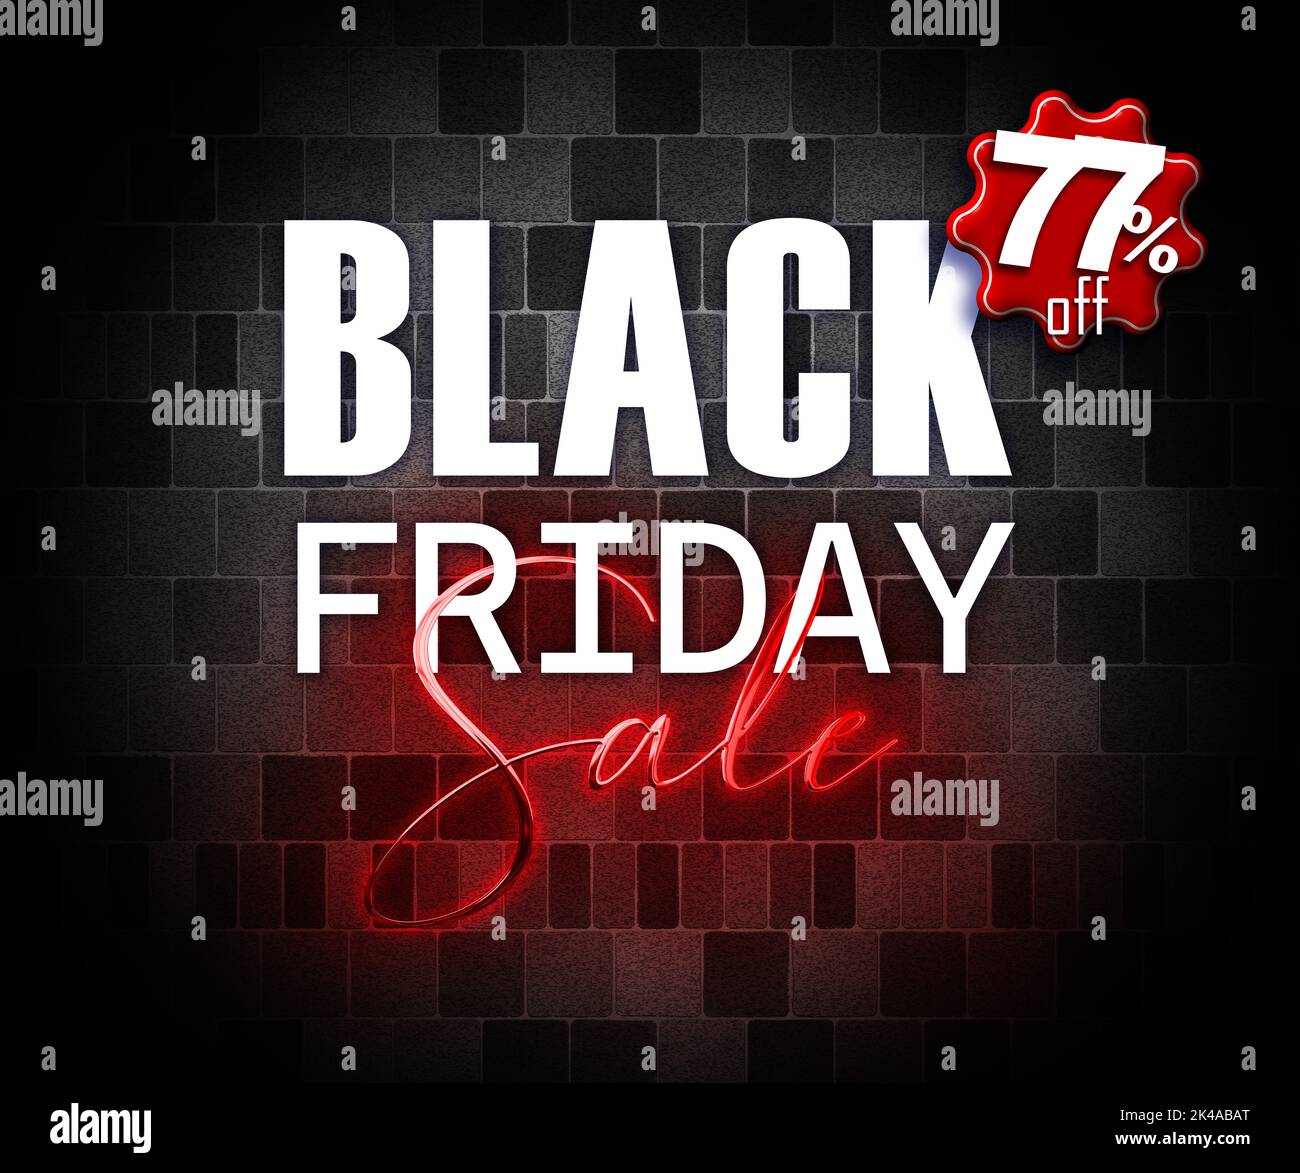 illustration with 3d elements black friday promotion banner 77 percent off sales increase Stock Photo